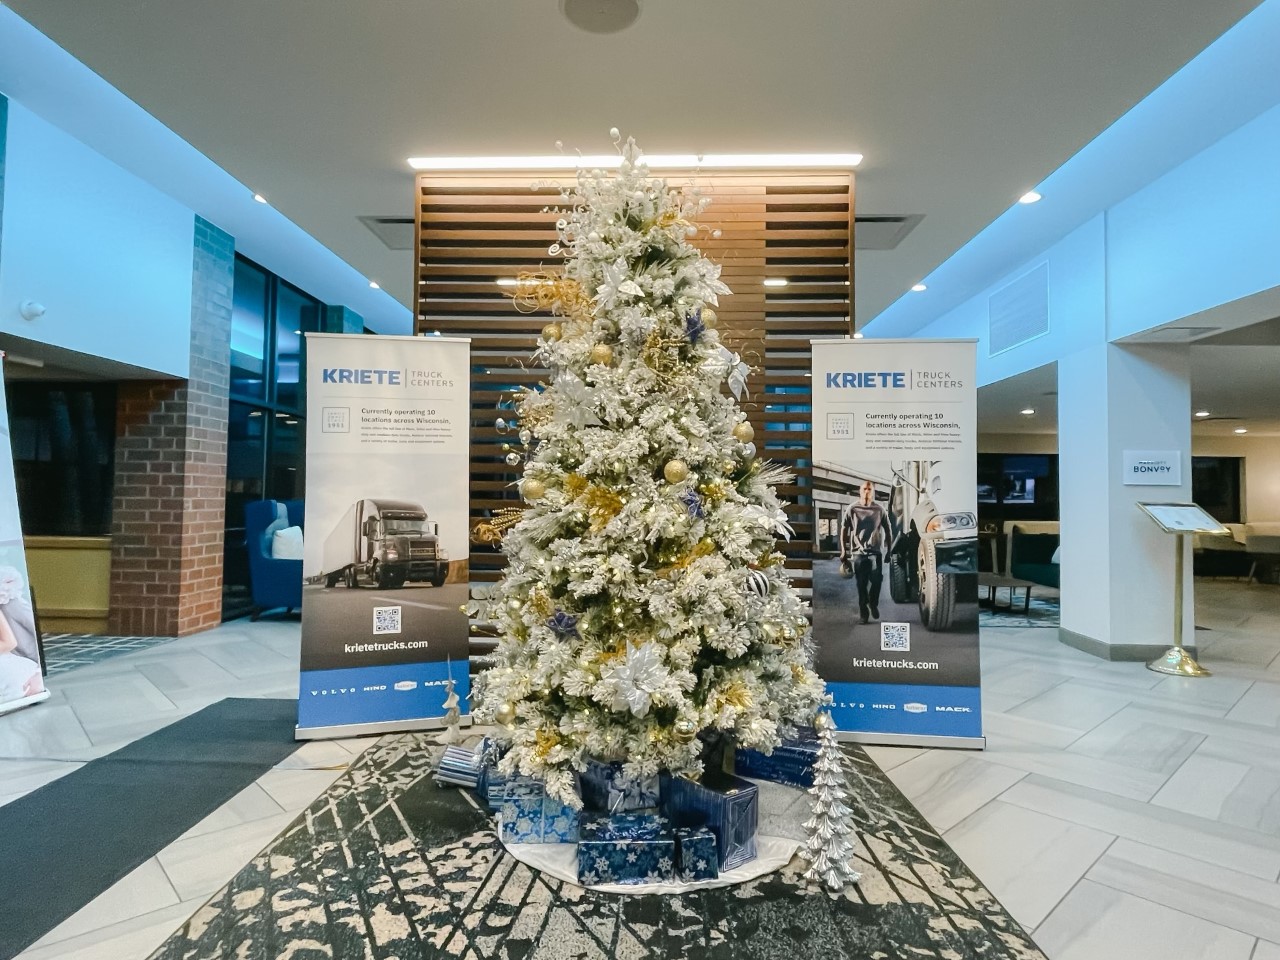 Attendees were welcomed to the venue with a Christmas Tree and Kriete Truck Centers banners.